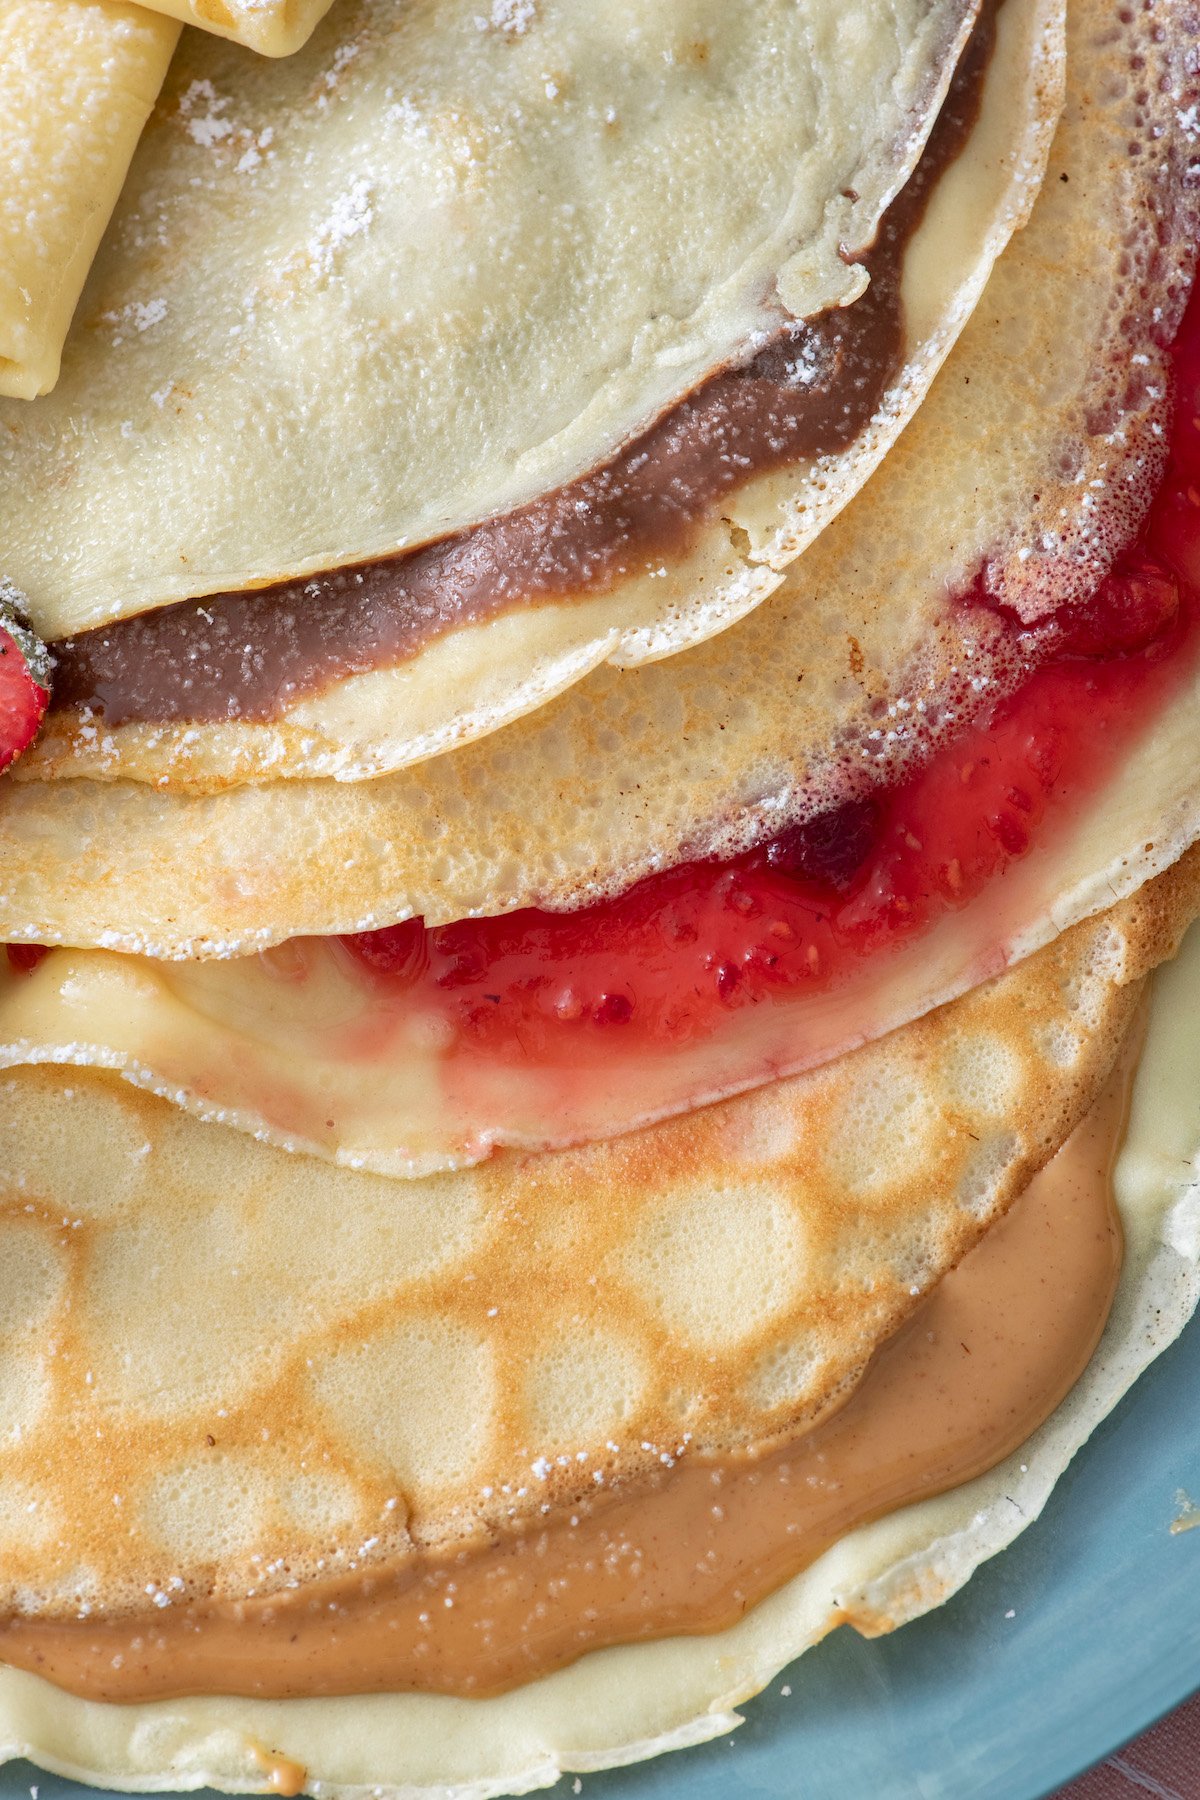 Crepes. One filled with Nutella, one with fruit preserves and one with peanut butter. 